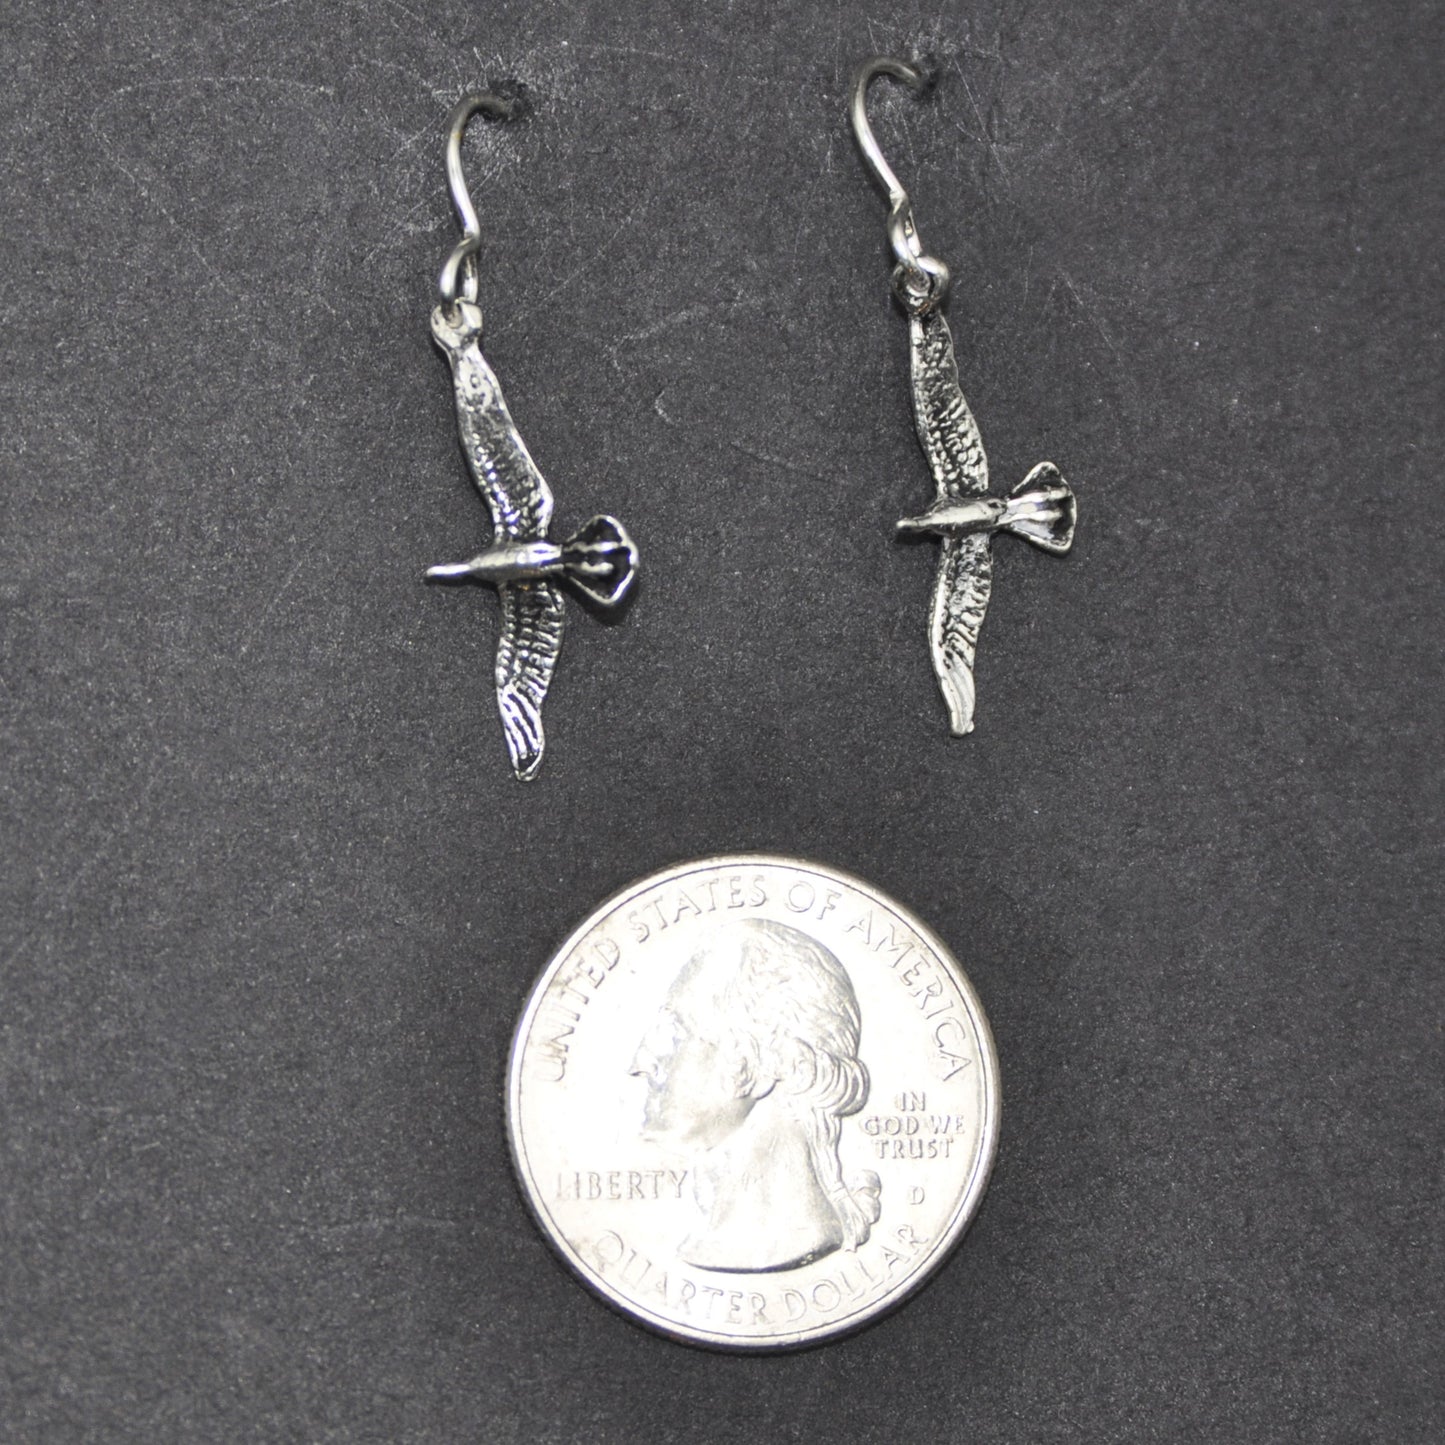 Eagle Earrings, intricately designed Handcrafted Silver Jewelry Endangered Species